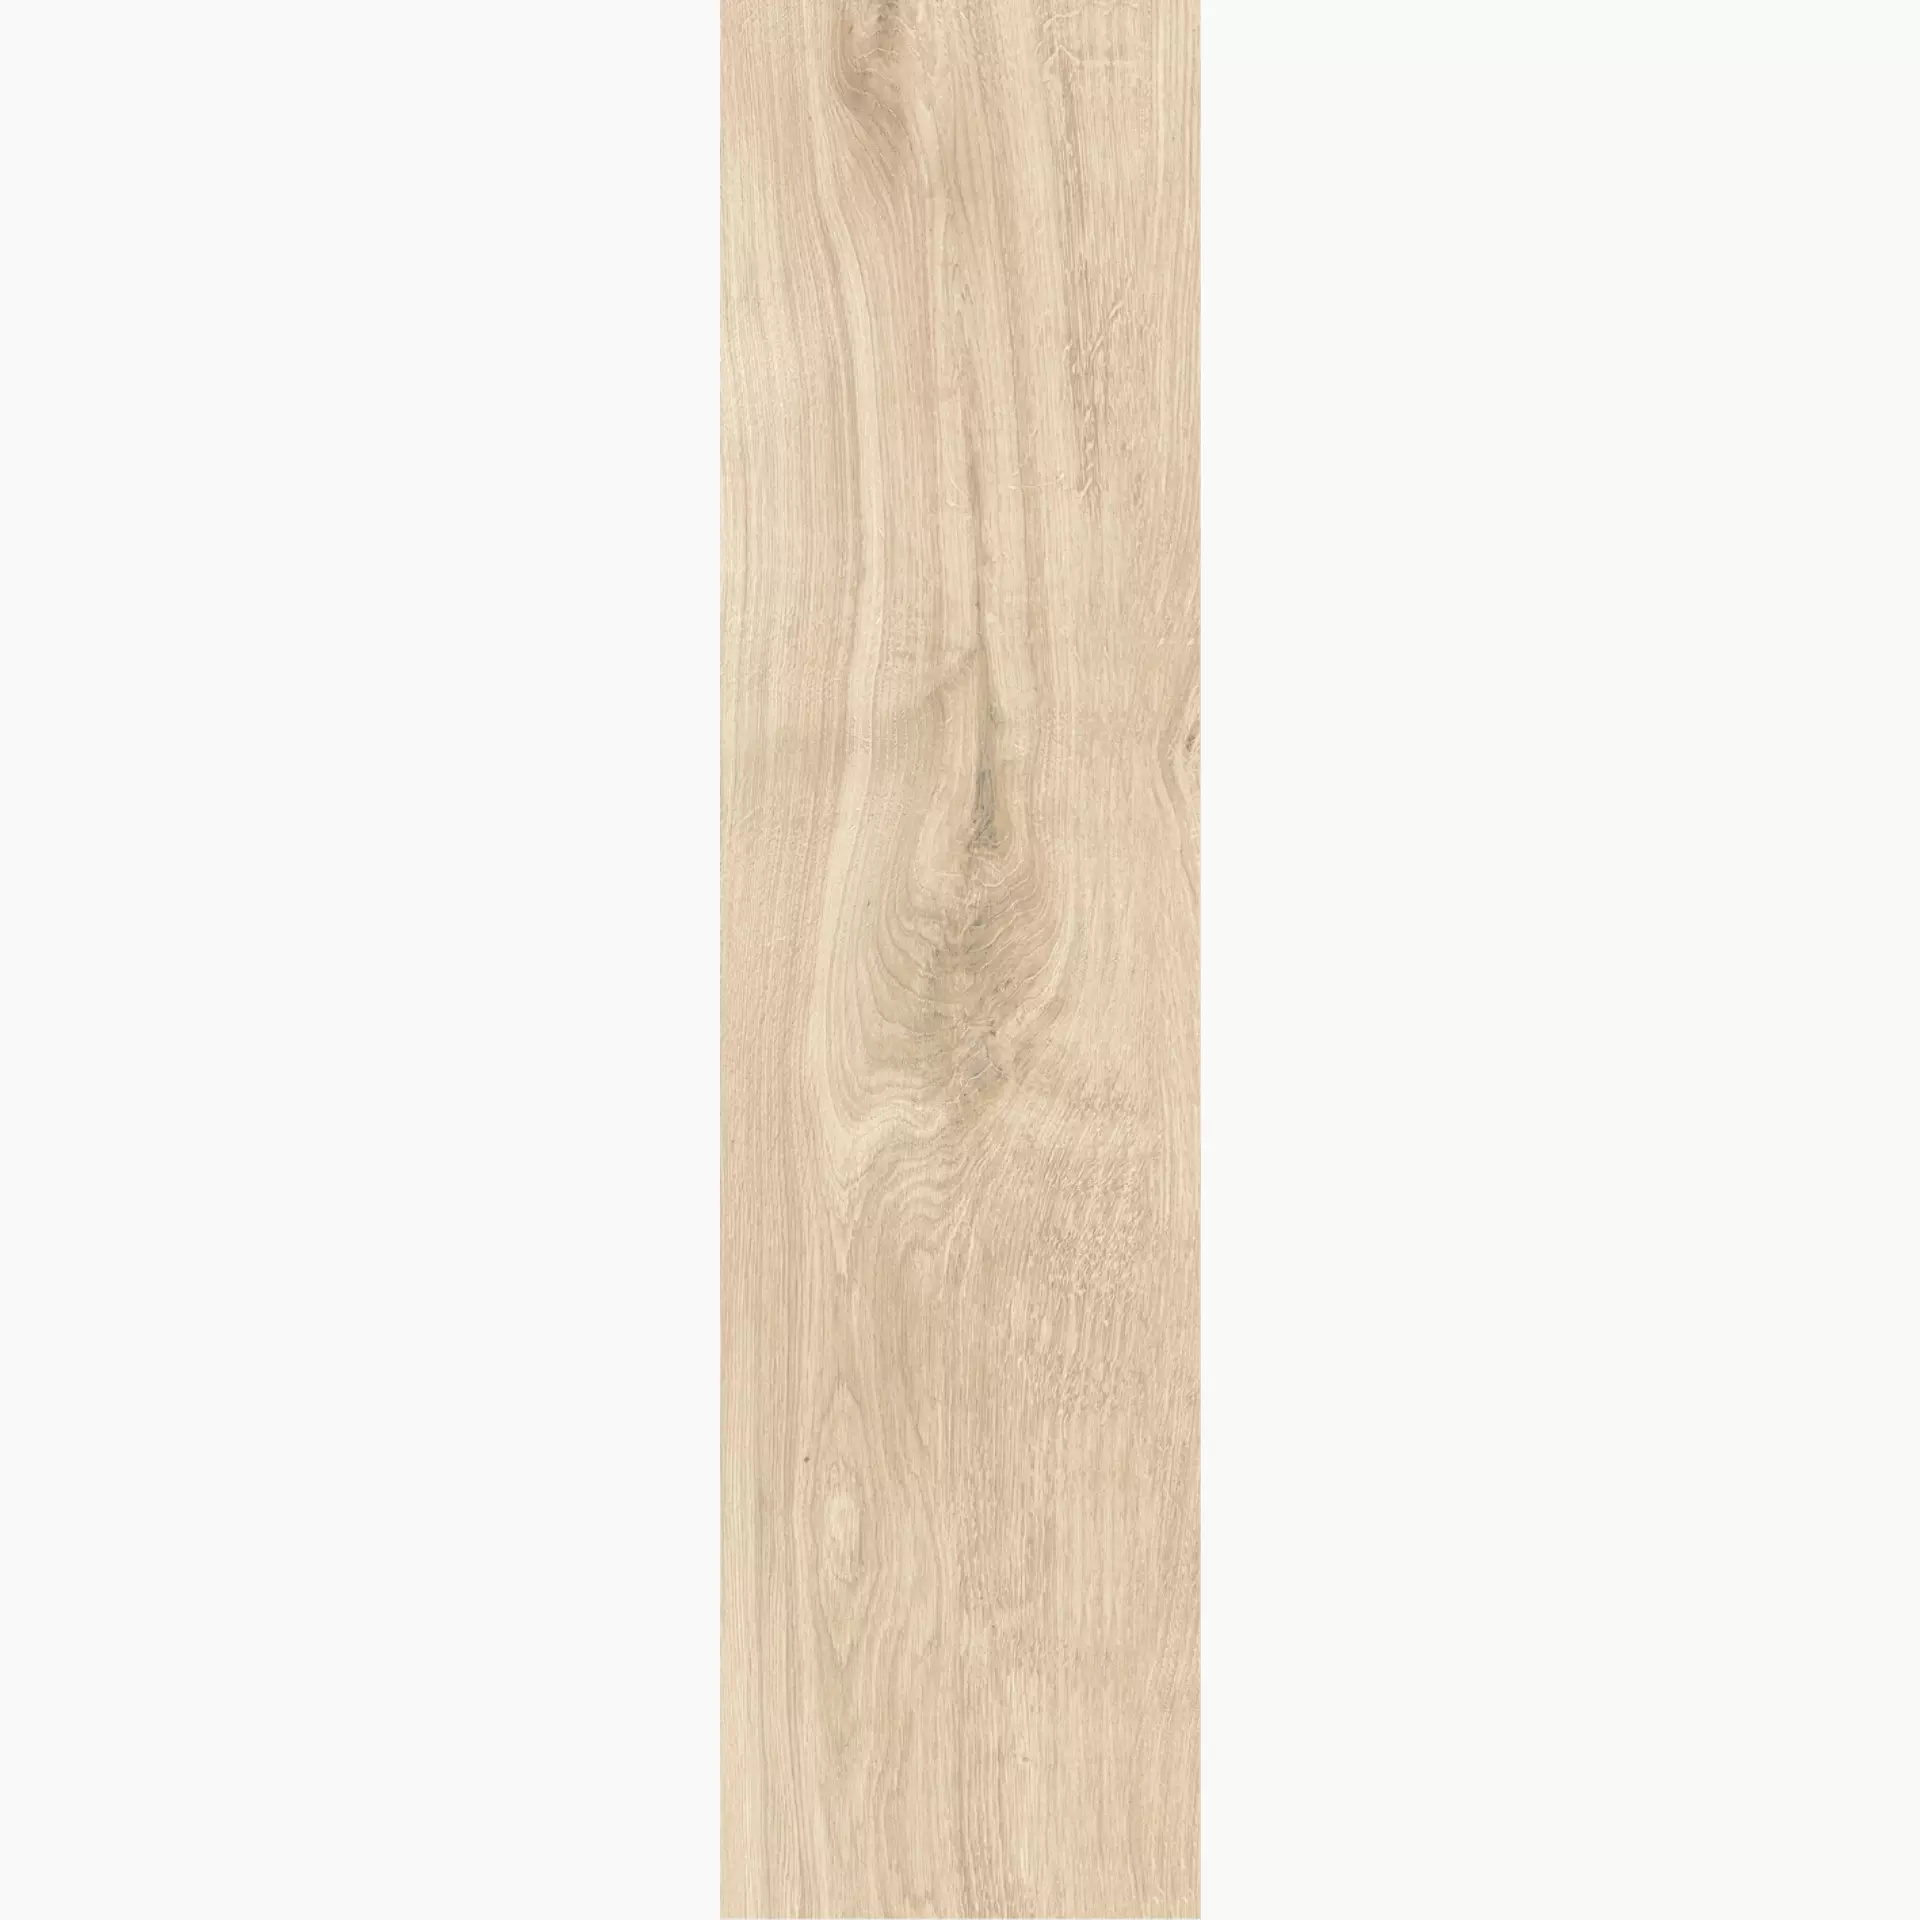 Novabell Artwood Maple Naturale AWD83RT 30x120cm rectified 9mm